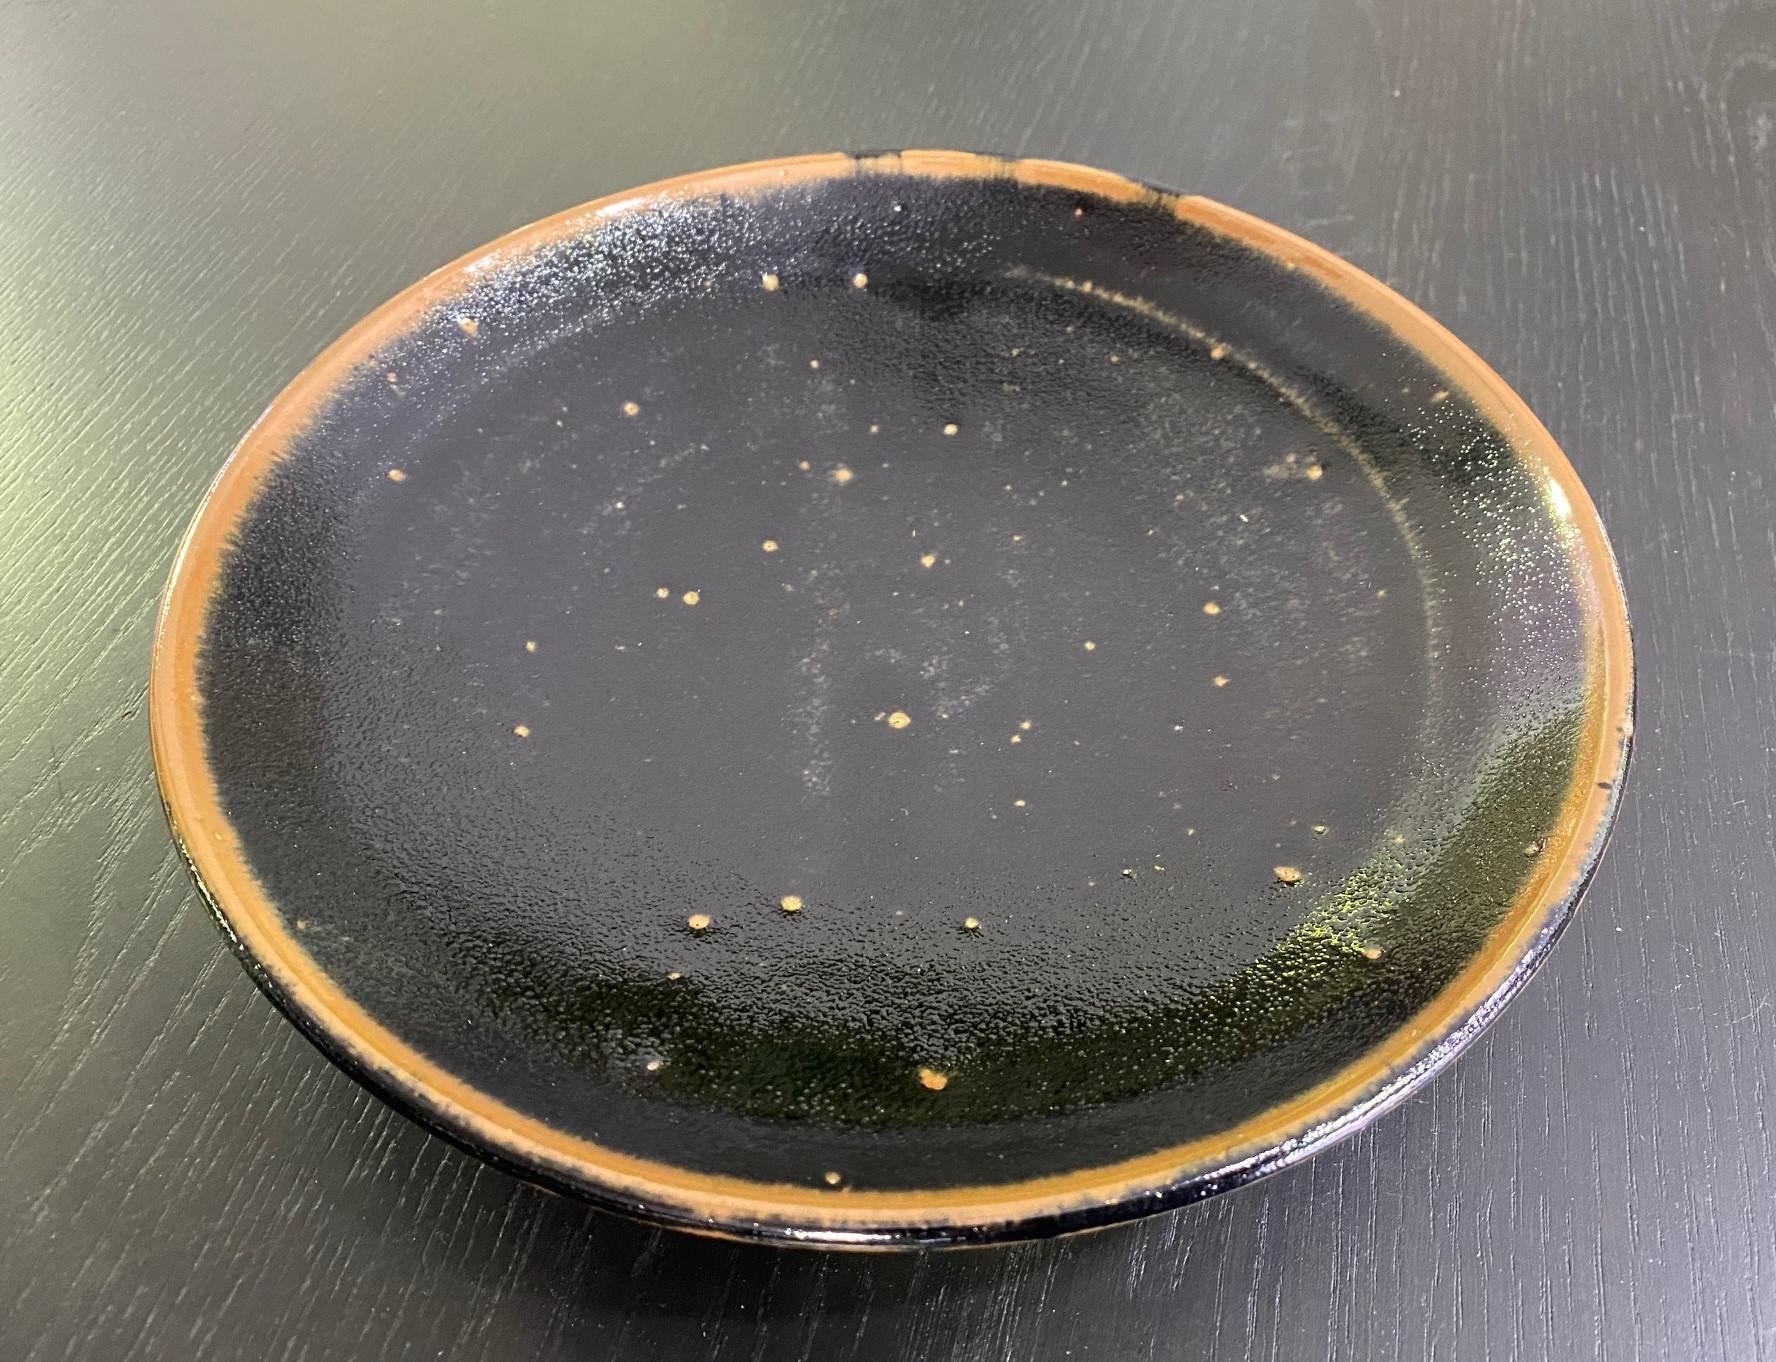 An exquisite, beautifully crafted, black-glazed plate by master Japanese potter Shoji Hamada. This is likely an early work based on the notation and the script on the box lid (see translation below) which we have been told by a Japanese expert is